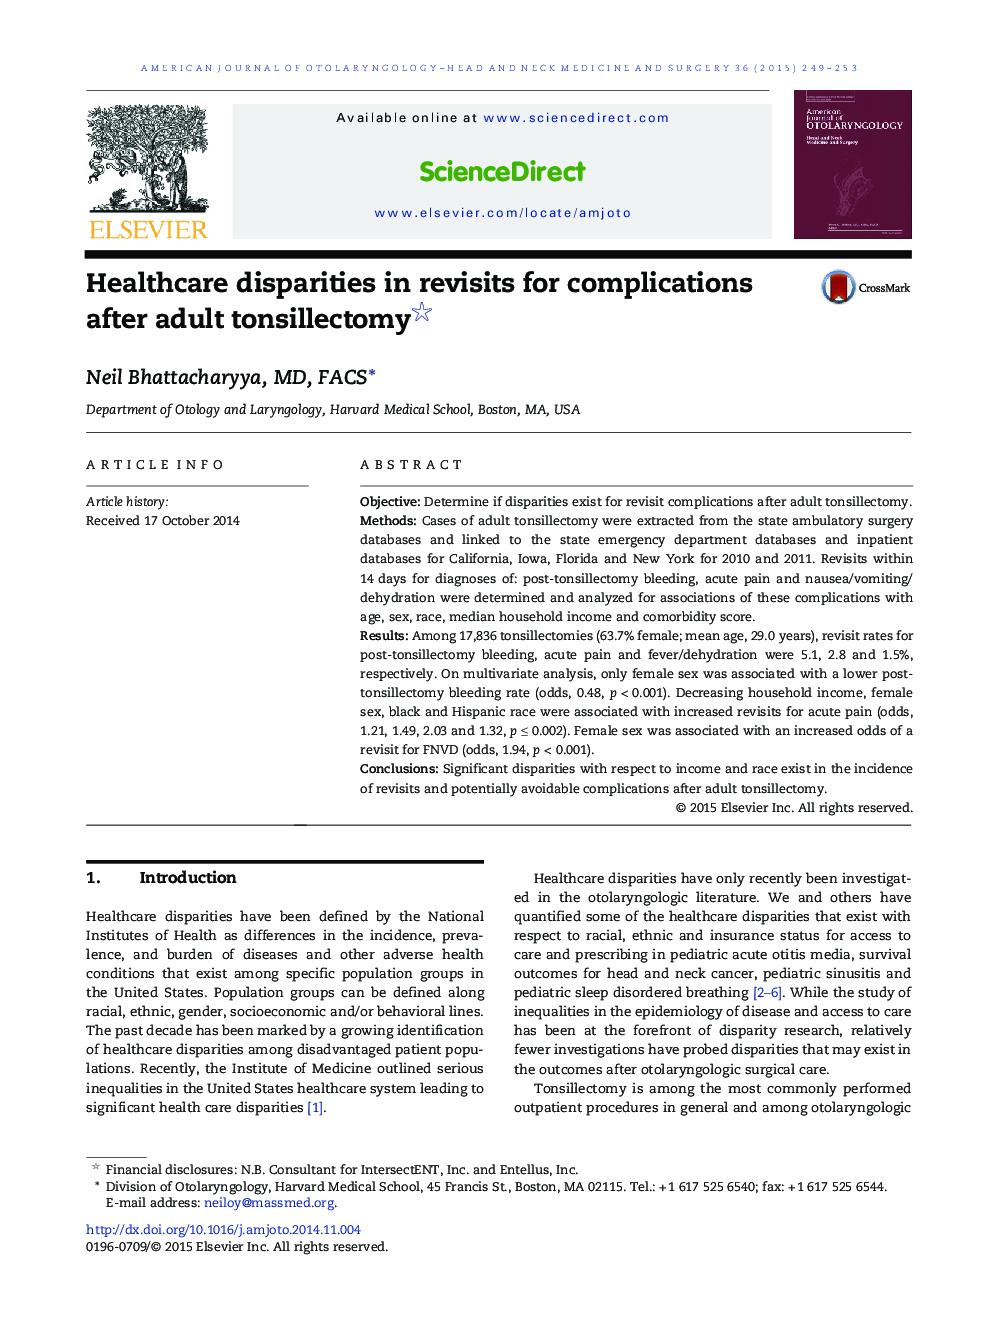 Healthcare disparities in revisits for complications after adult tonsillectomy 